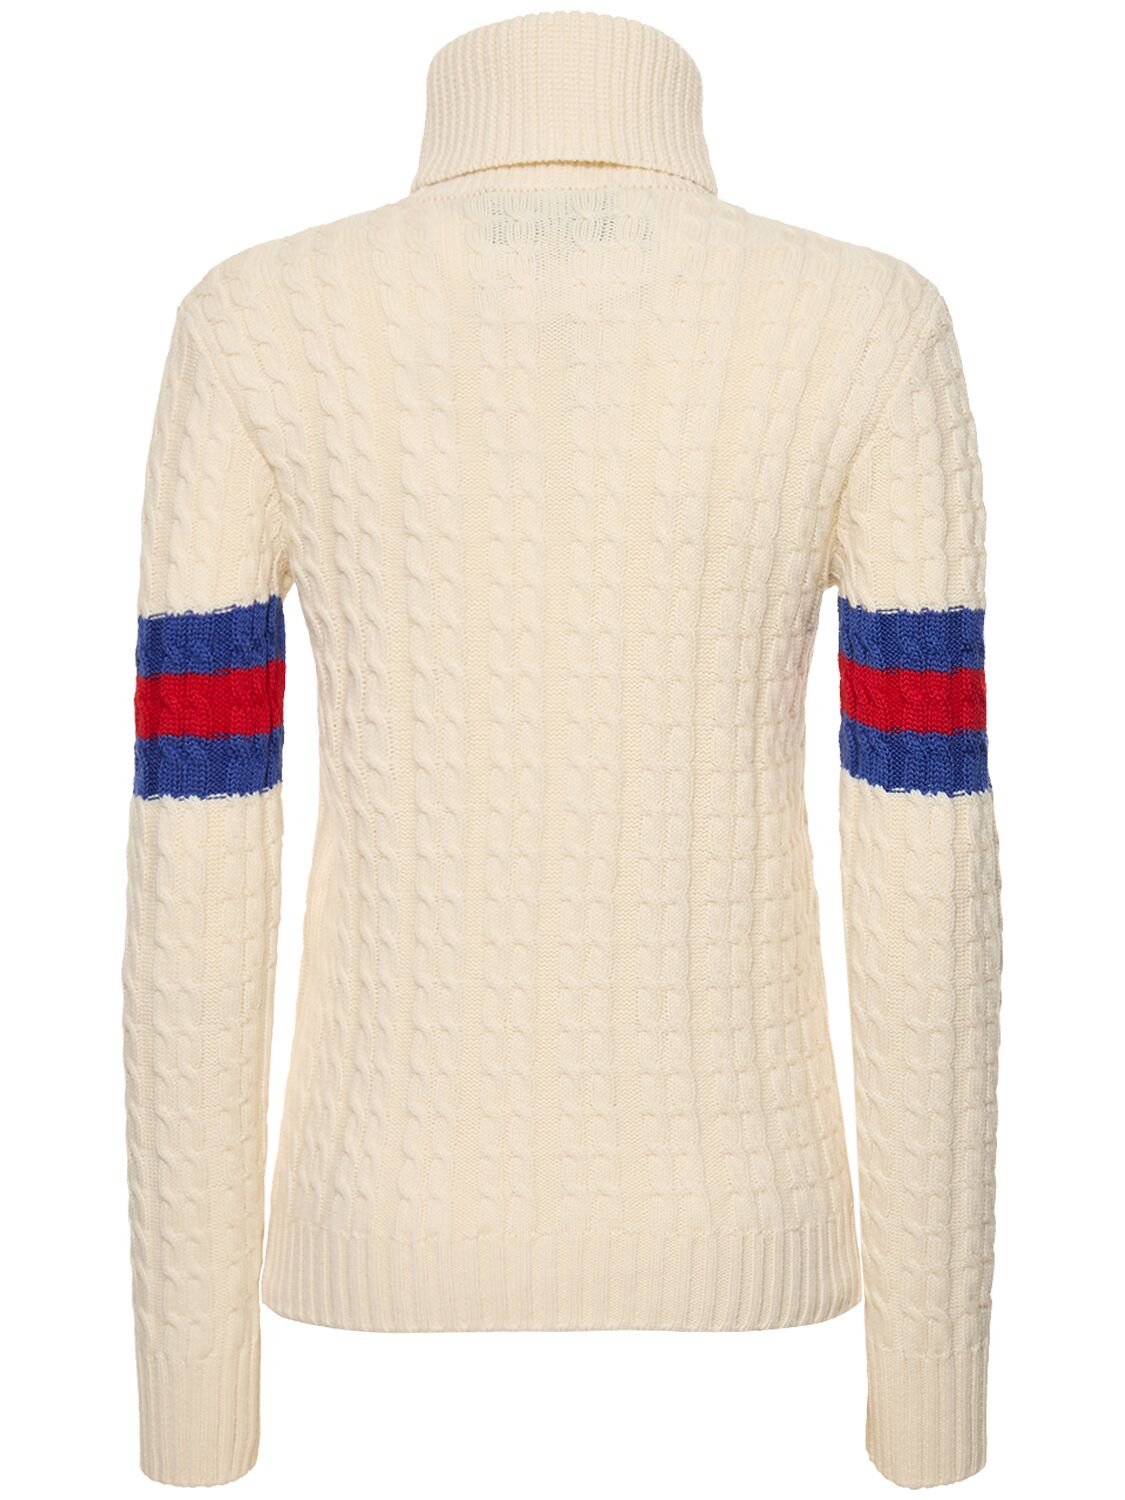 Shop Gucci Wool & Cashmere Cable Knit Sweater In Ivory,blue,red